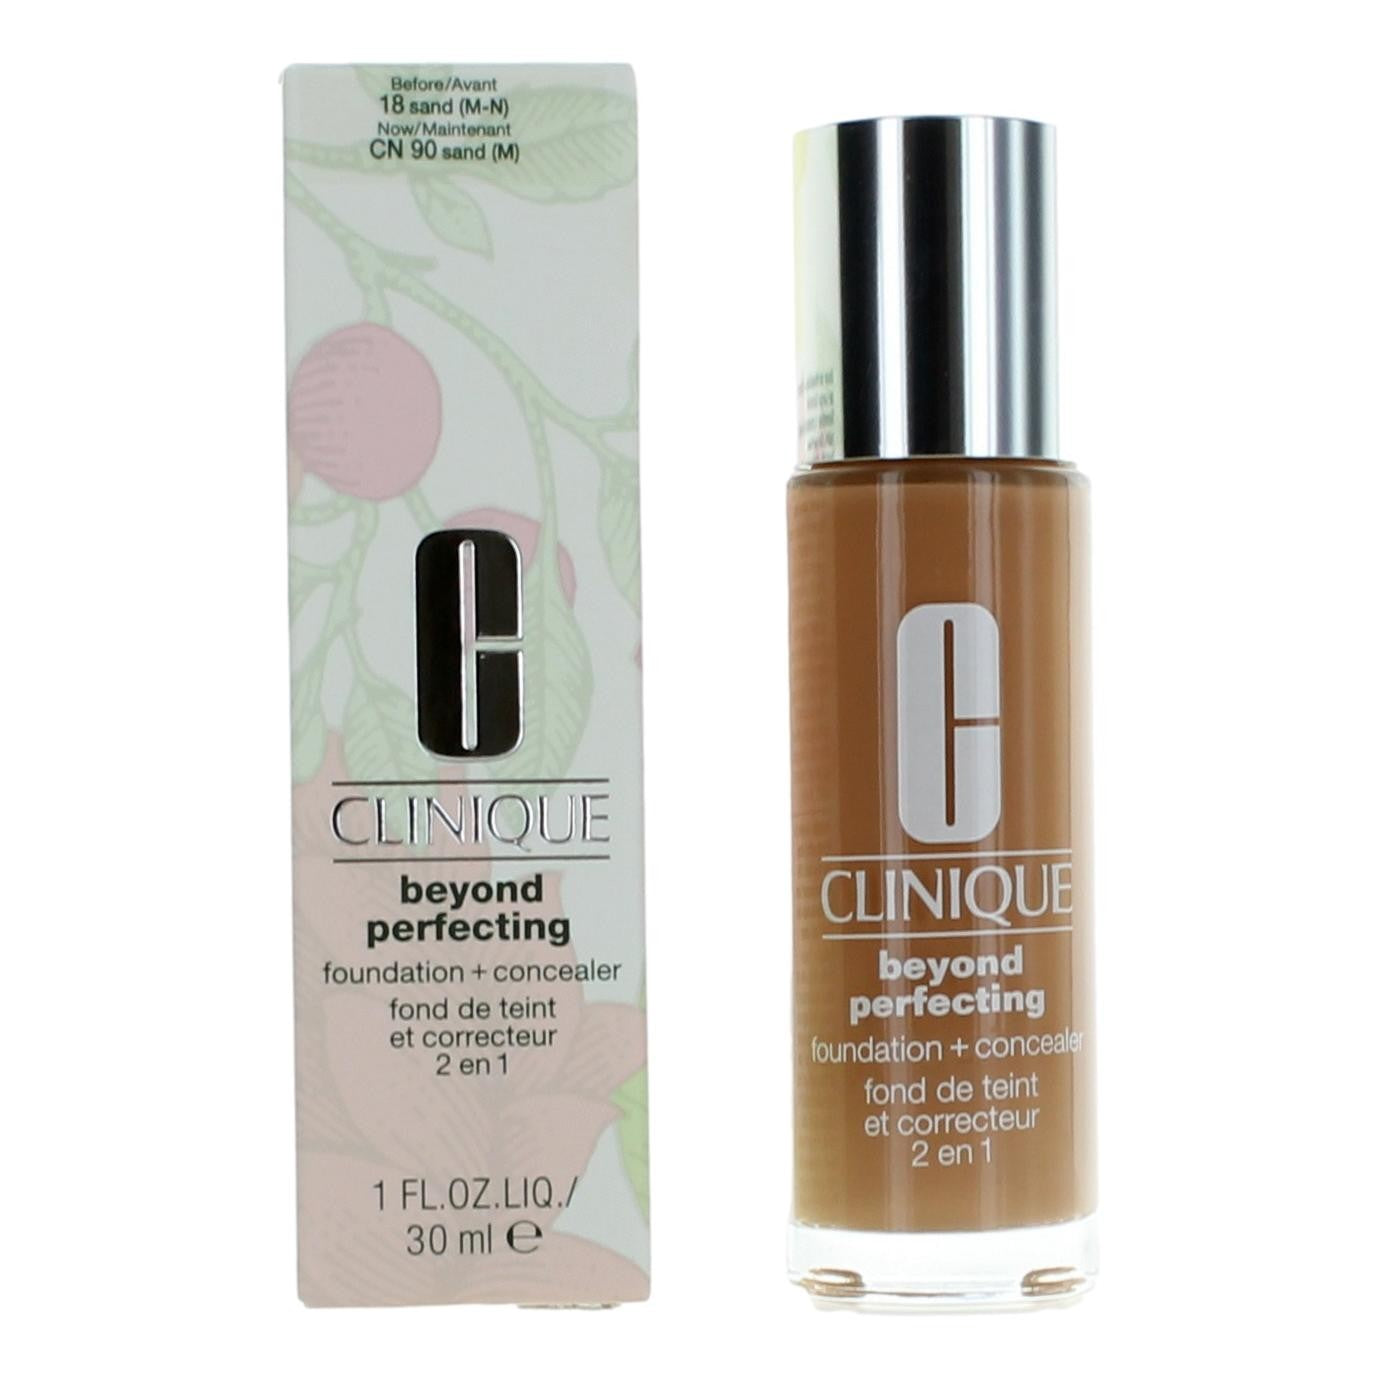 Clinique Beyond Perfecting by Clinique, 1oz Foundation + Concealer - CN 90 Sand - CN 90 Sand